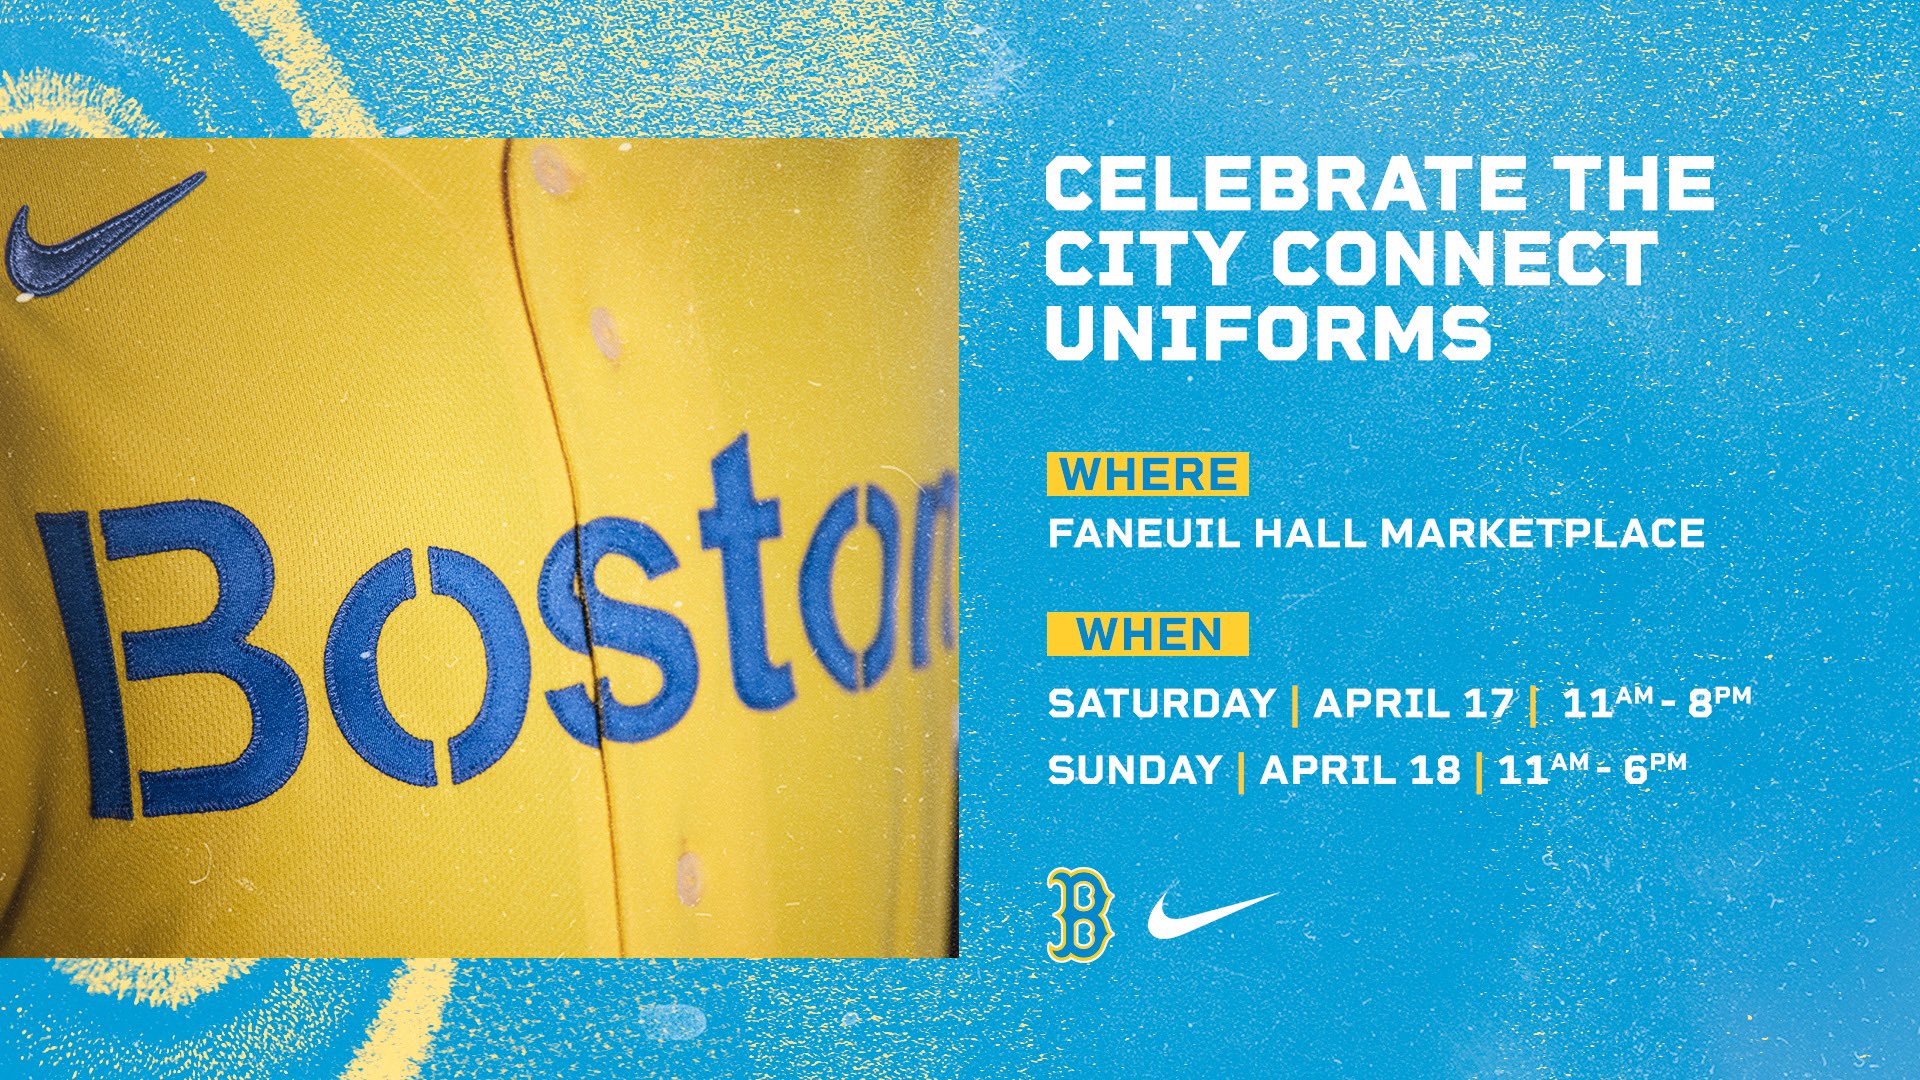 Red Sox on X: Celebrate our City Connect unis this weekend! The